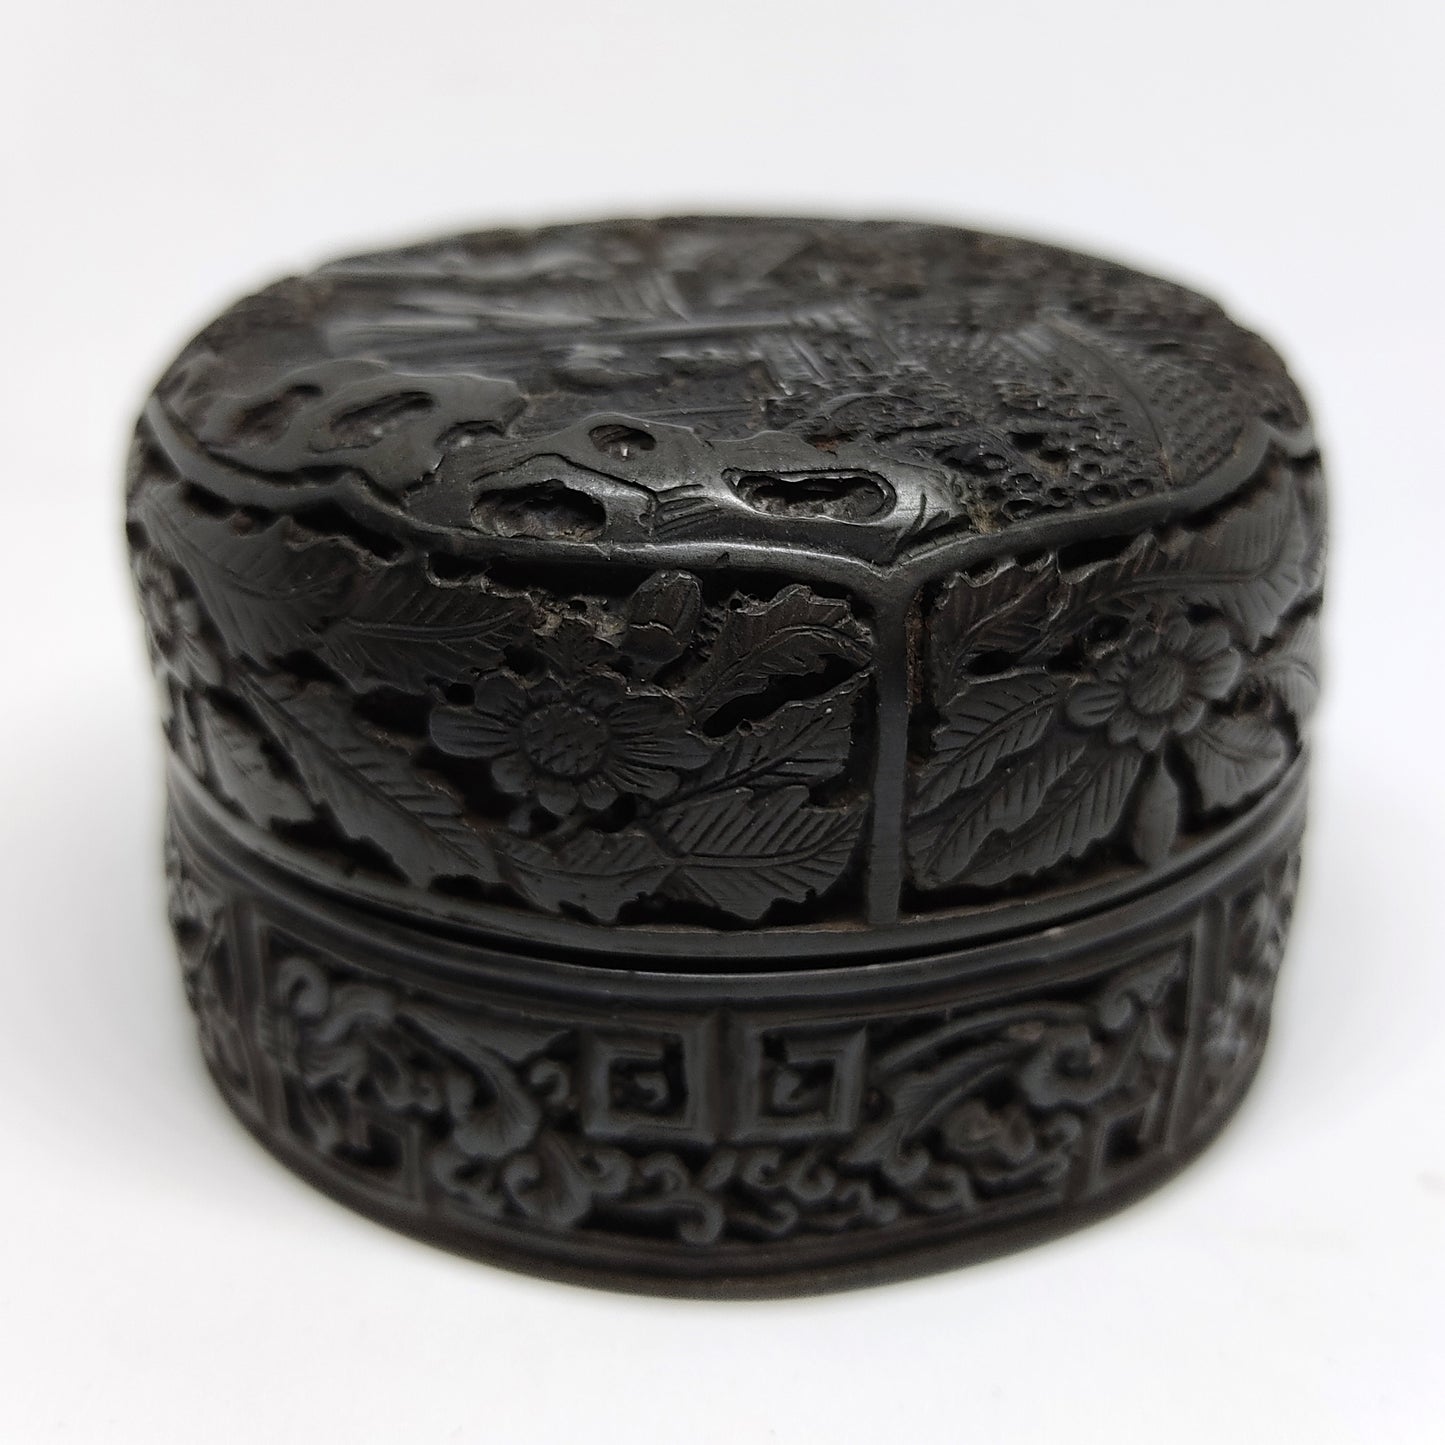 Black Wood Box With Lid Beautiful Carved Buddha Scenery Home Decoration 2.75"